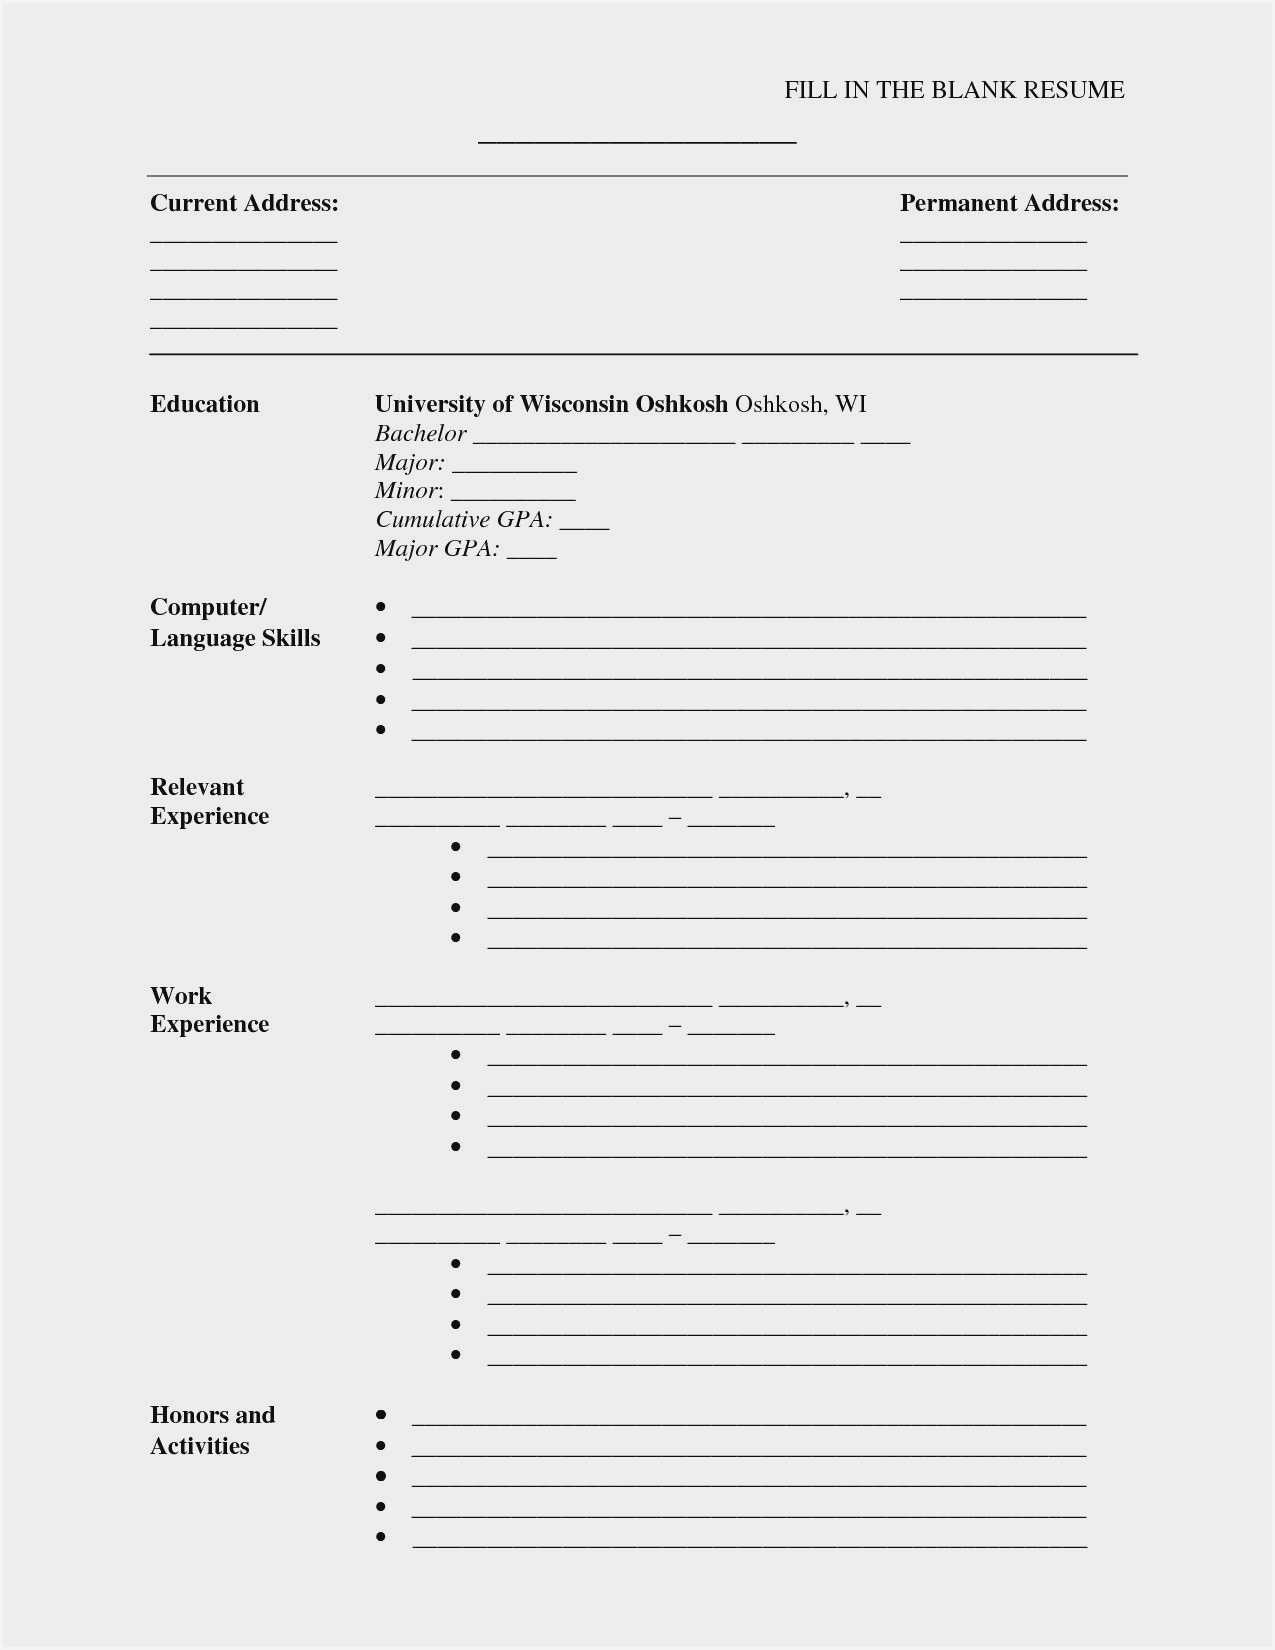 Blank Cv Format Word Download - Resume : Resume Sample #3945 With Regard To Blank Resume Templates For Microsoft Word